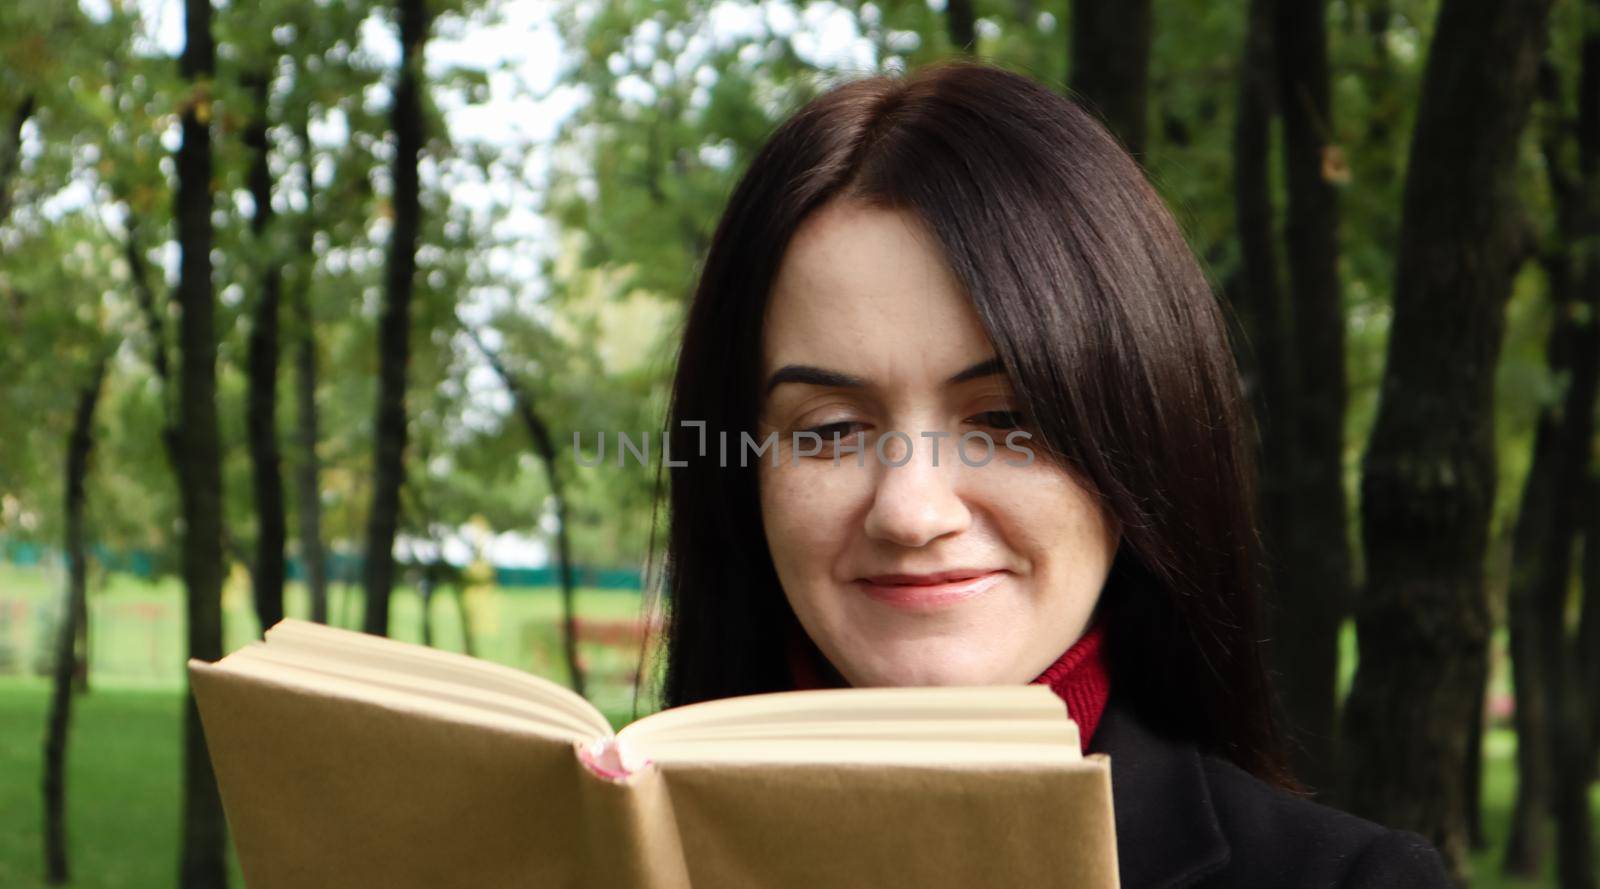 Smiling brunette woman reading a book in the park. Portrait of a happy charming Caucasian woman outdoors